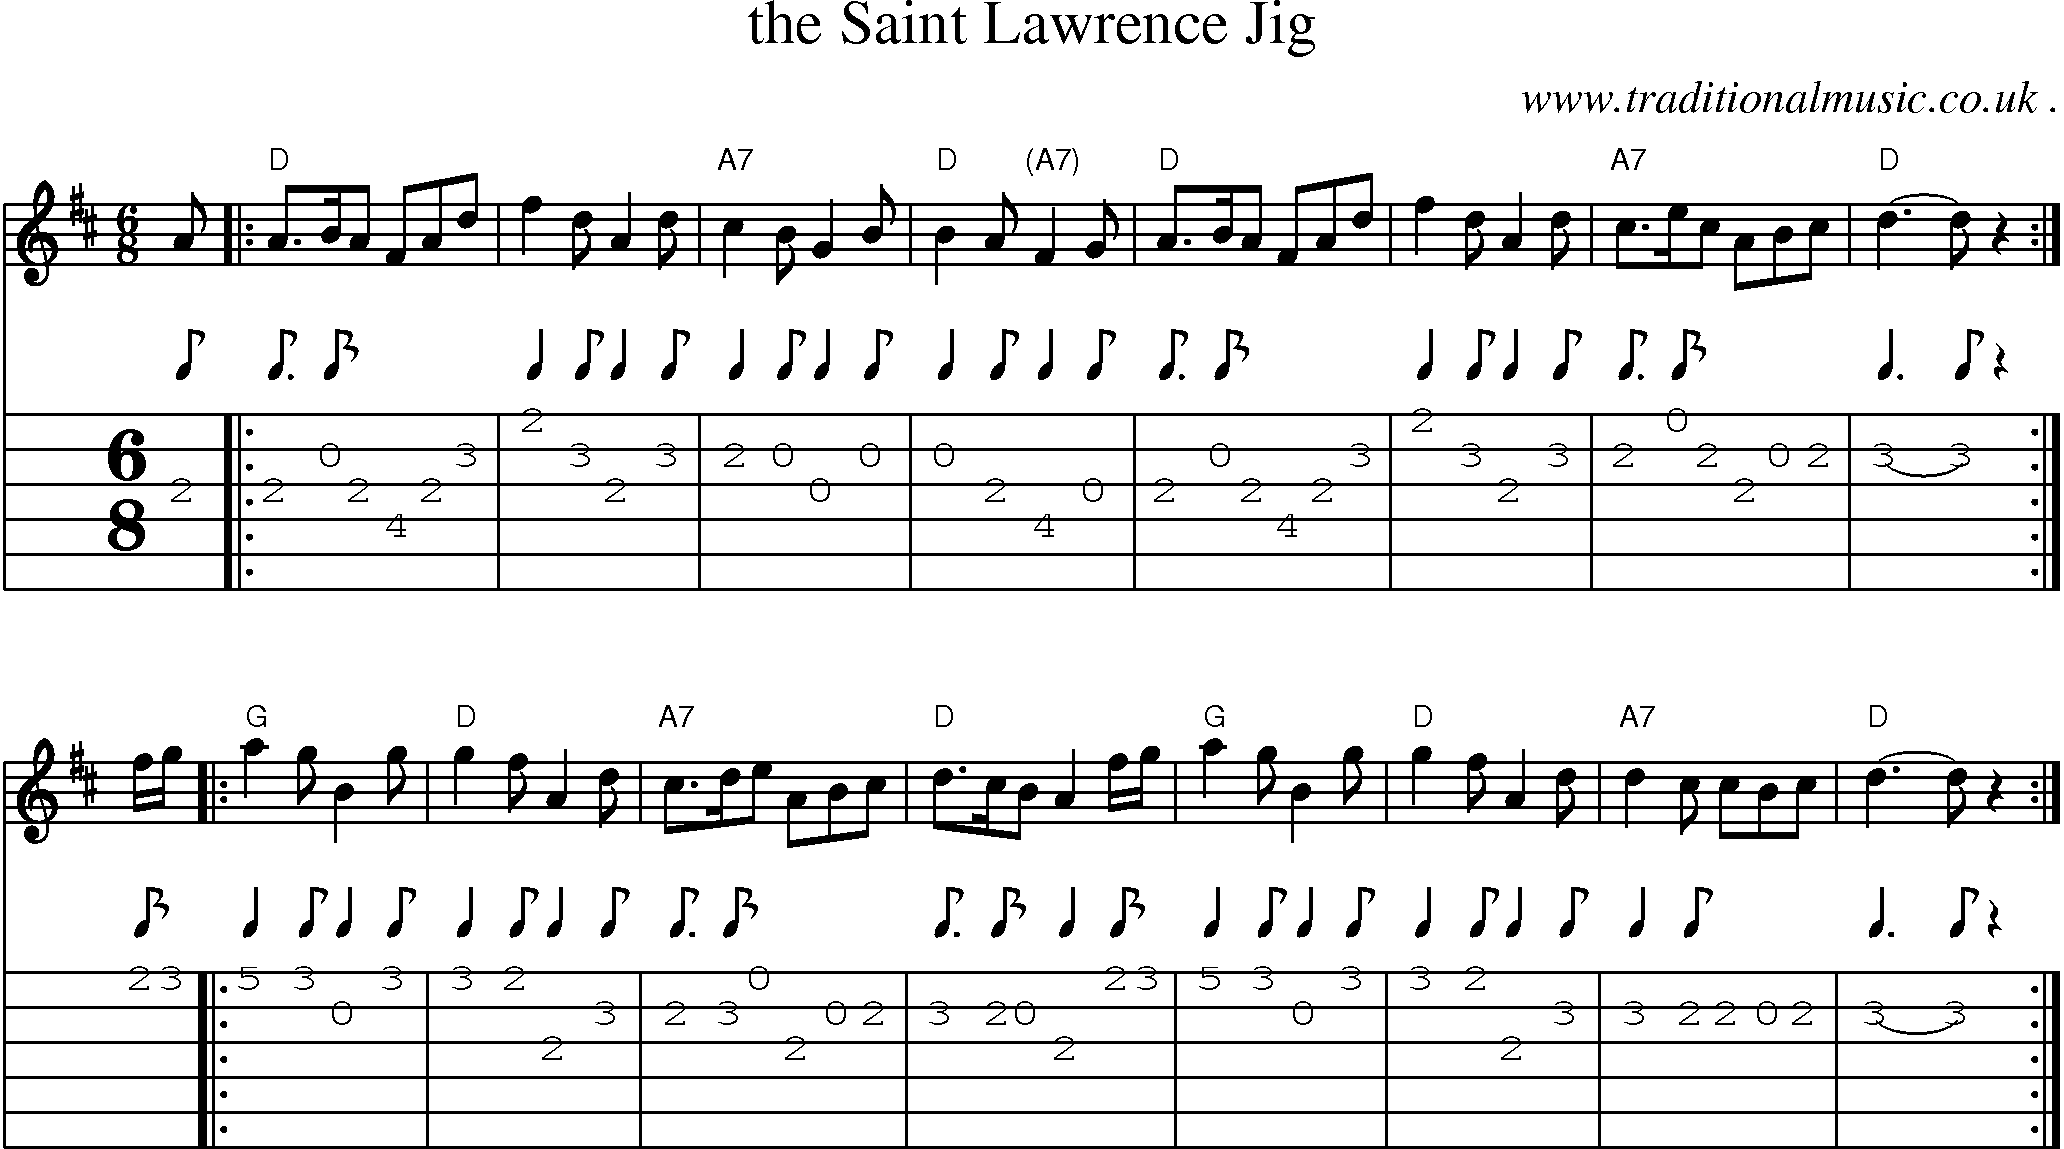 Sheet-music  score, Chords and Guitar Tabs for The Saint Lawrence Jig